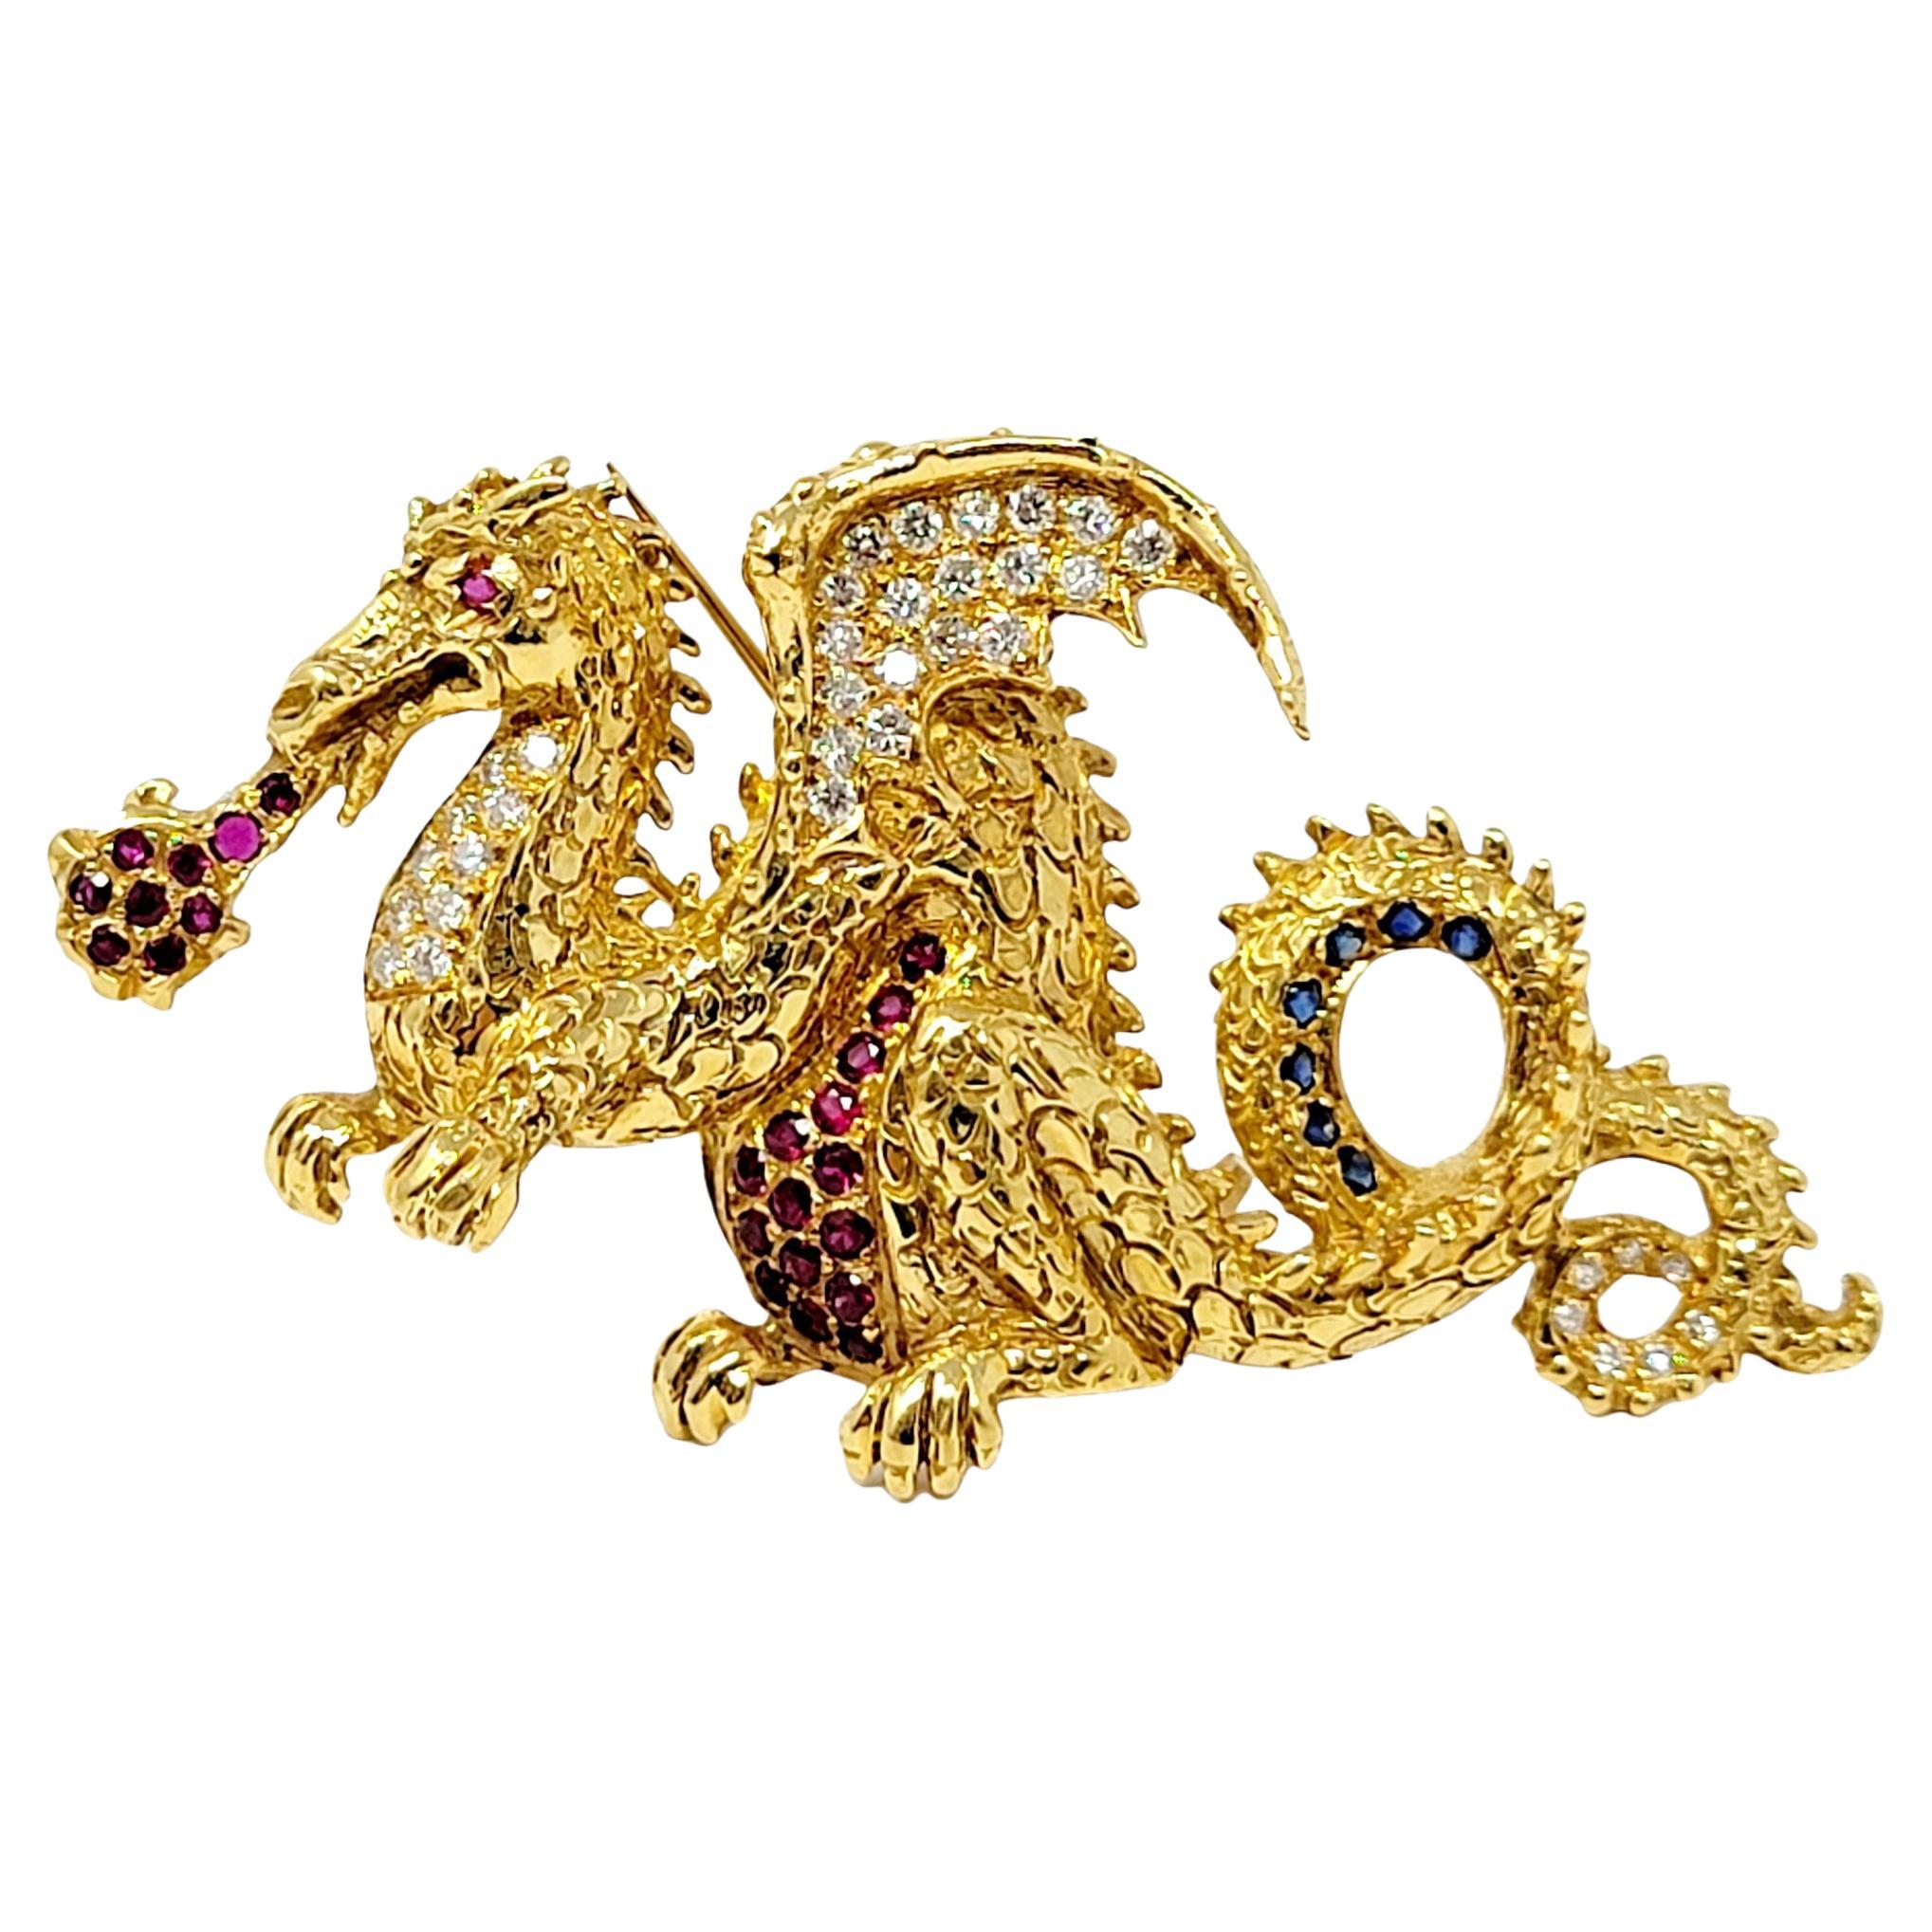 Diamond, Ruby and Sapphire Dragon Brooch 18 Karat Yellow Gold .93 Carats Total  For Sale